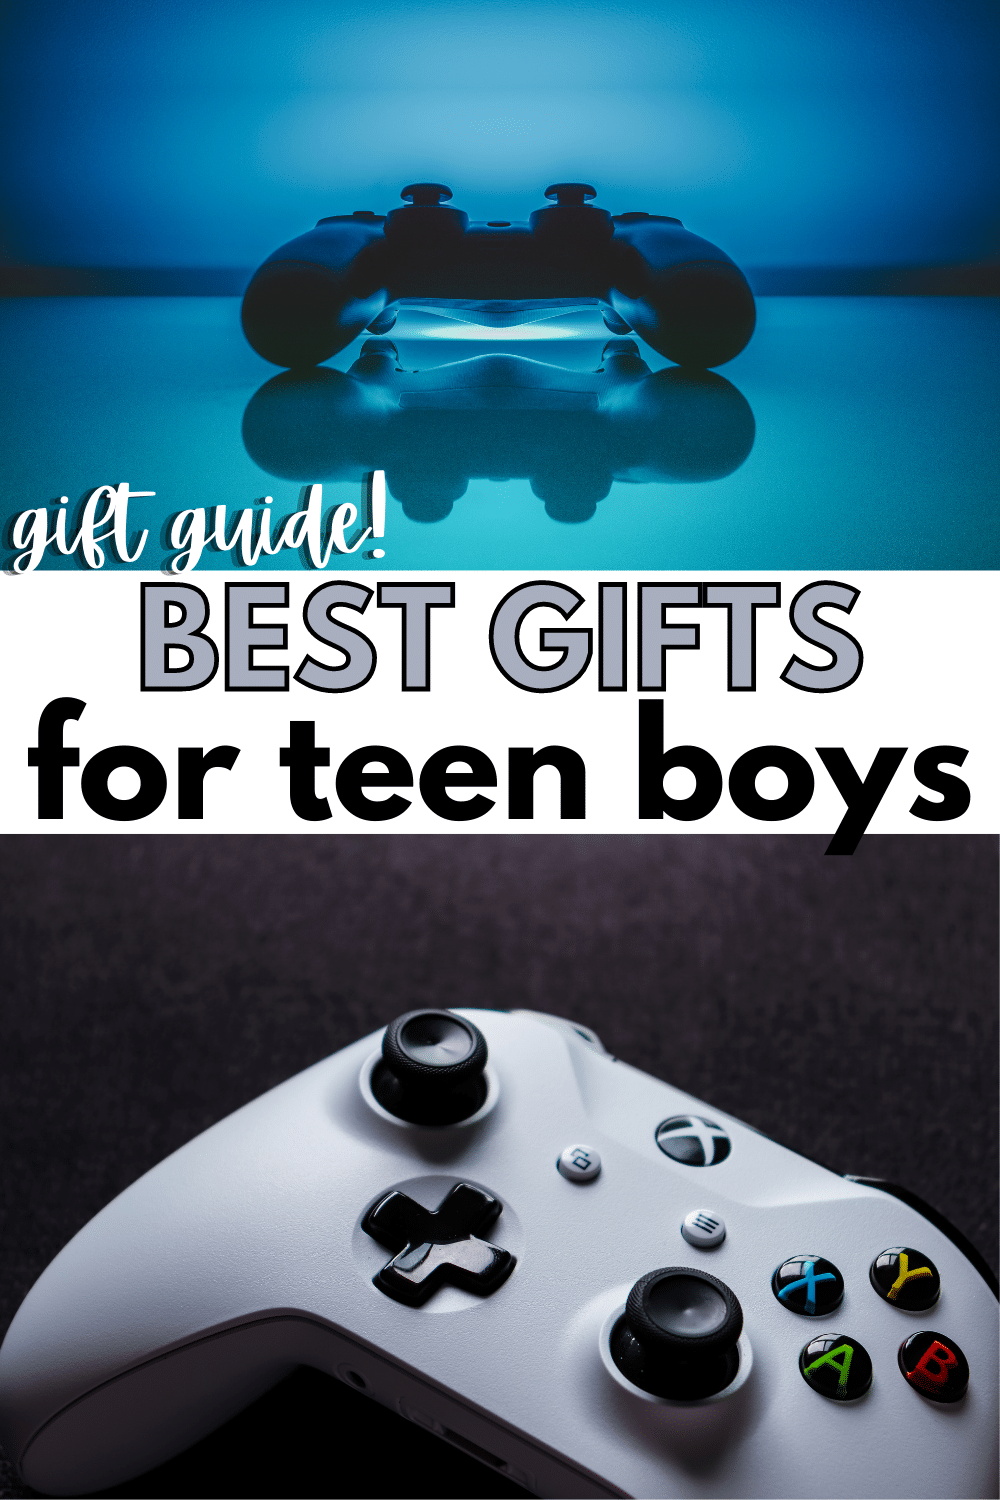 Best Gifts for Teen Boys with a title text reading gift guide Best Gifts for teen boys